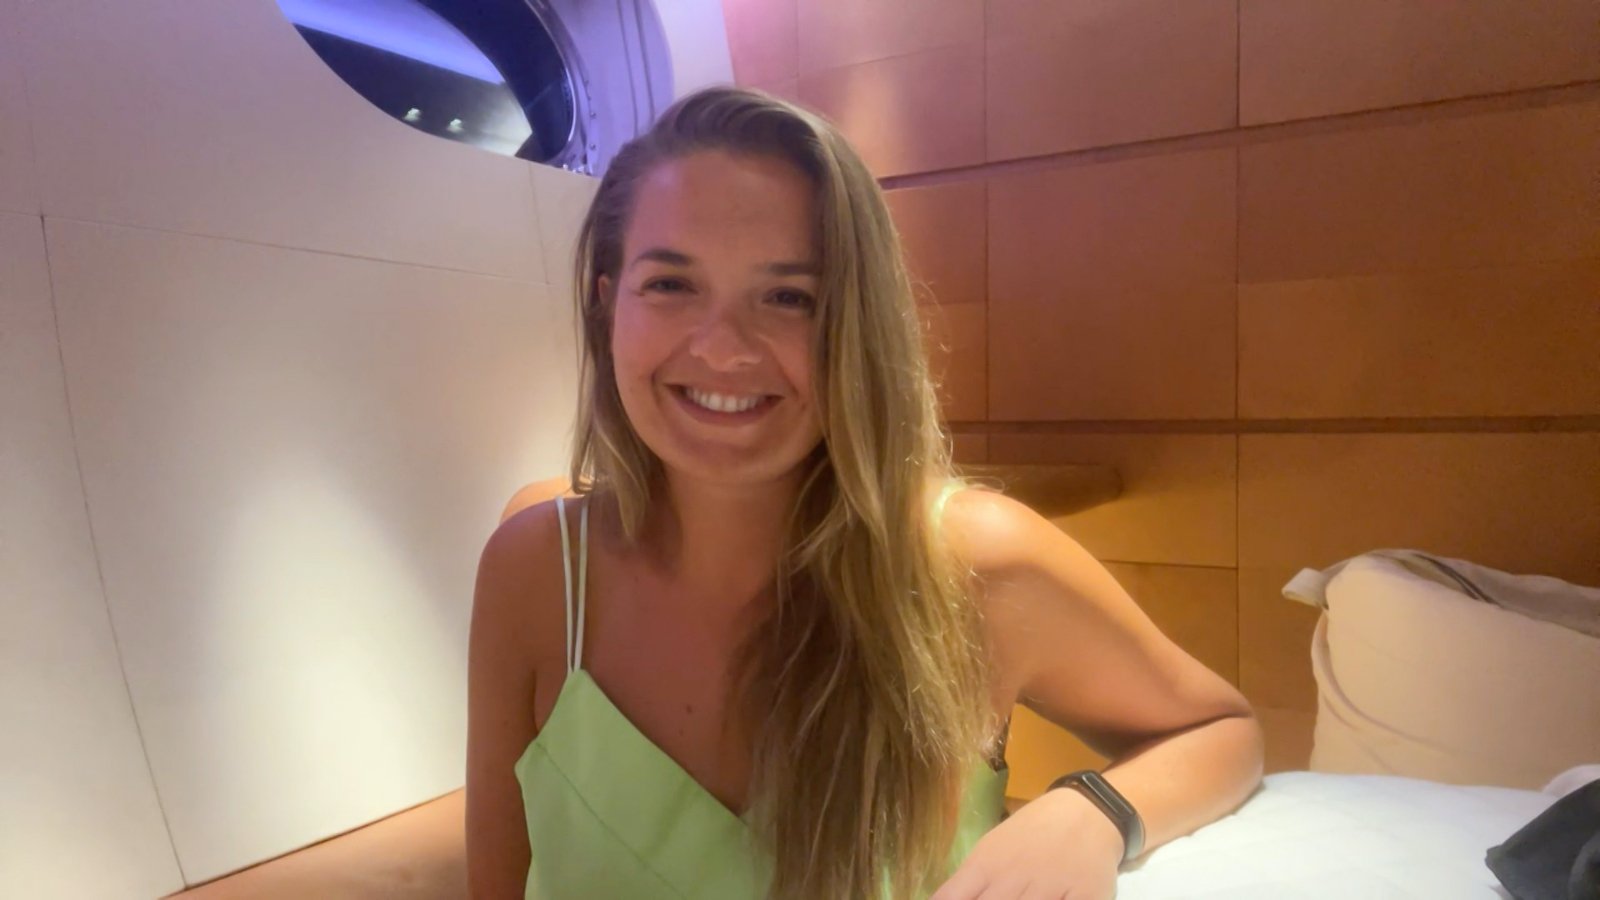 Daisy Kelliher from Below Deck Sailing Yacht appeared on WWHL from the boat she was working on